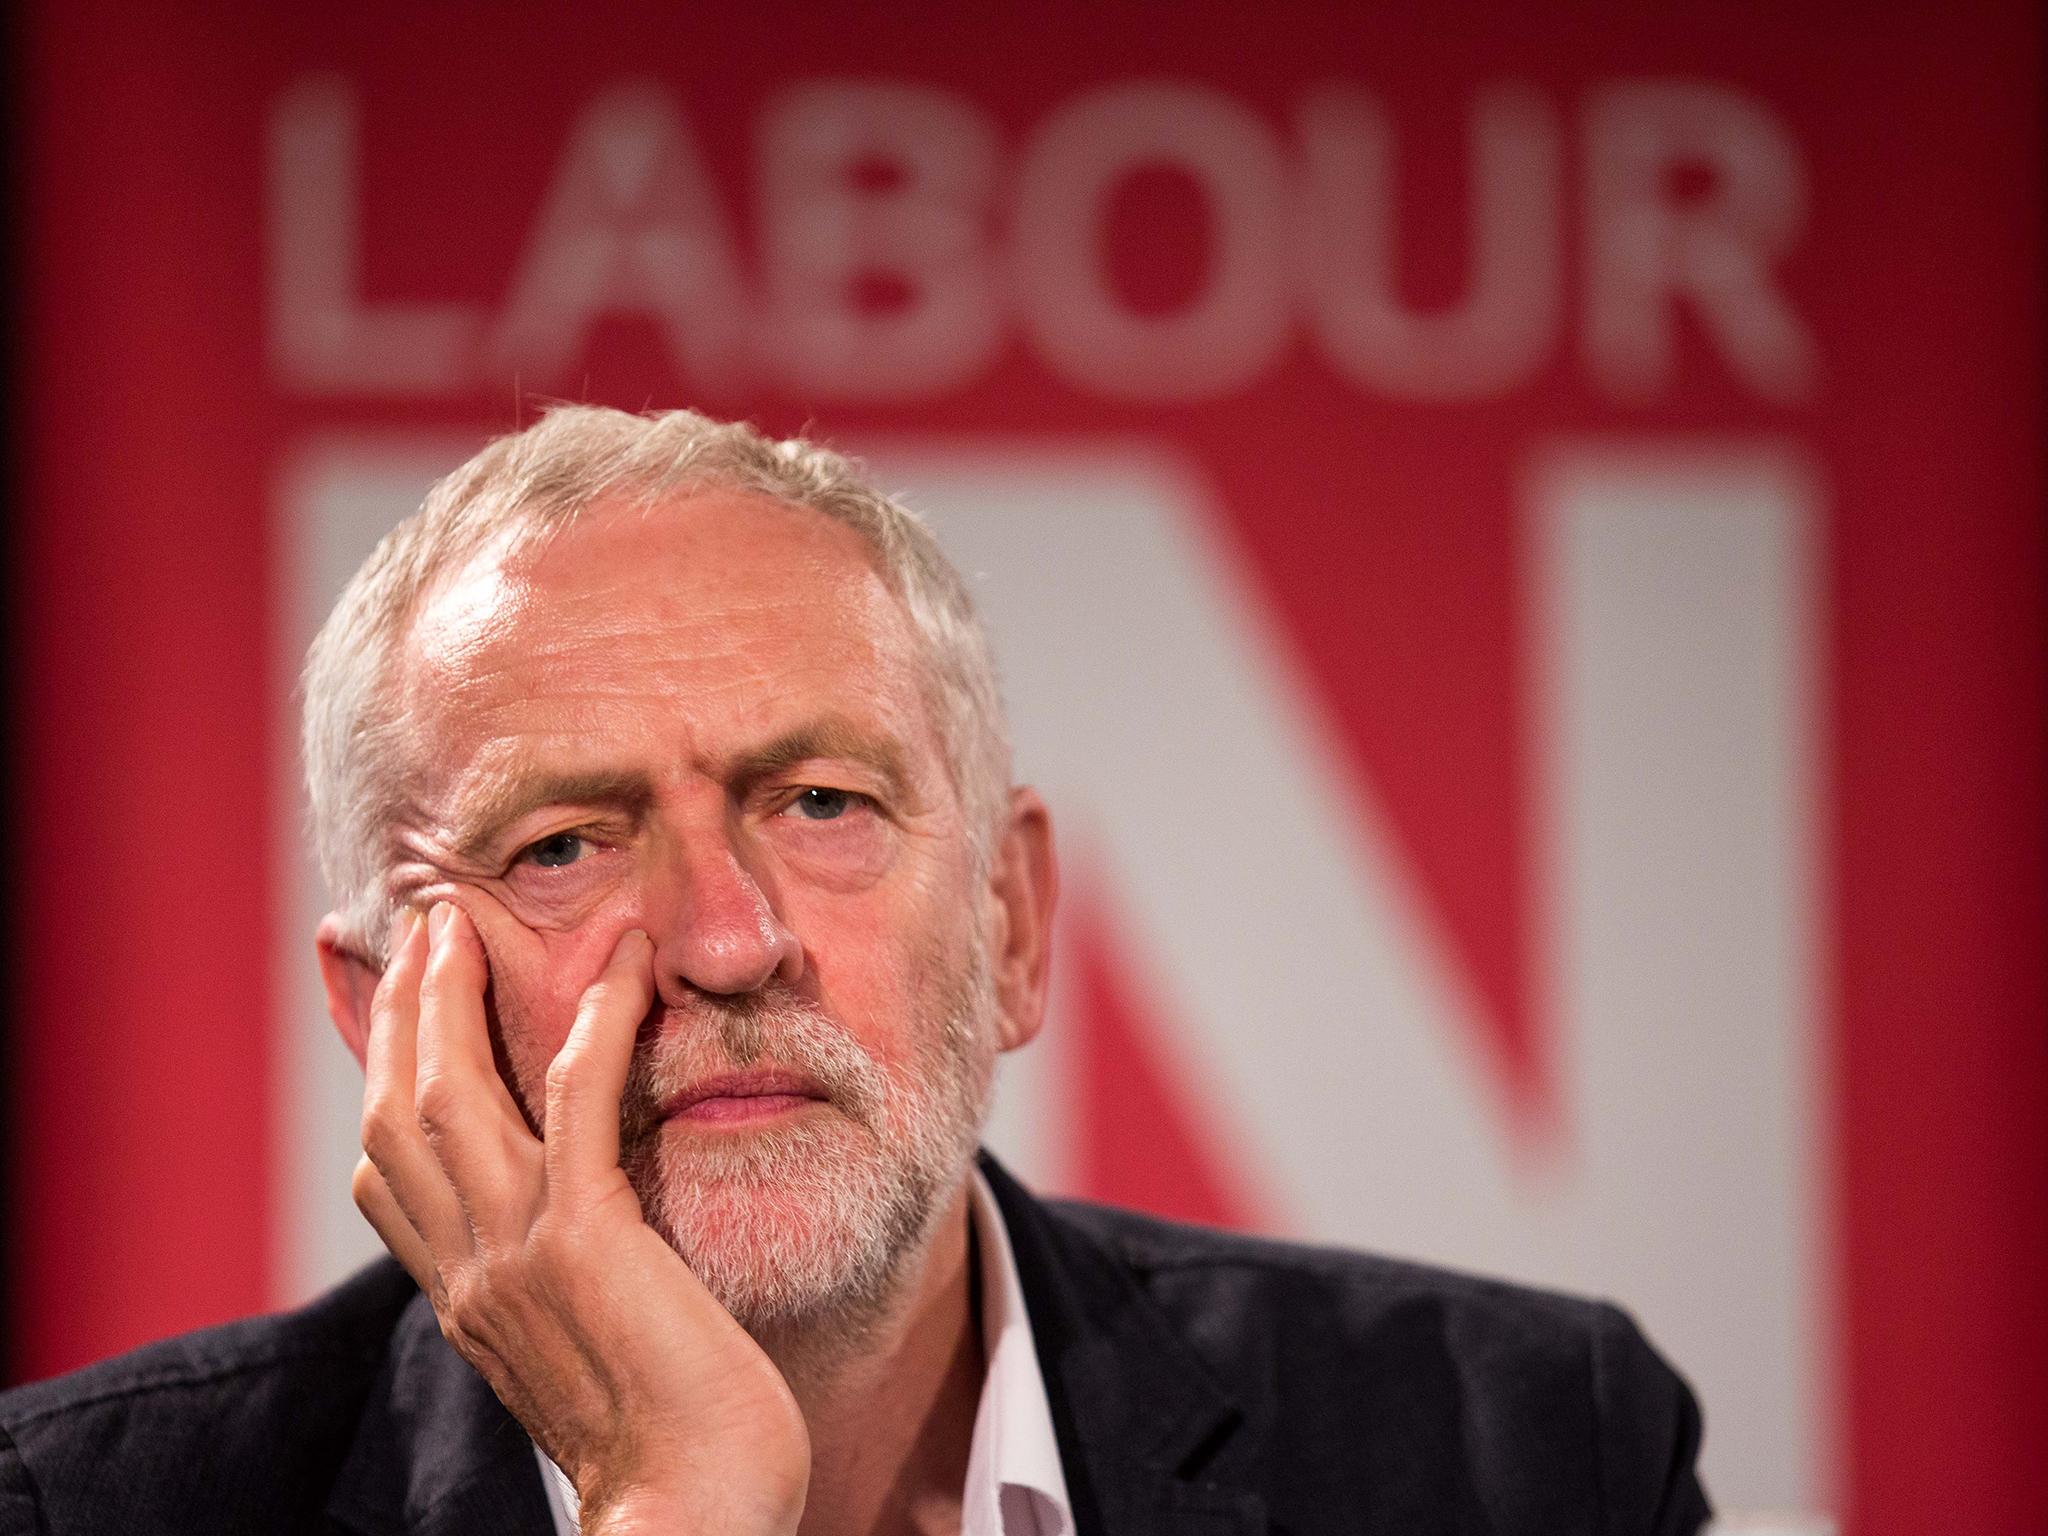 Jeremy Corbyn has come under pressure to amend his party's definition of antisemitism